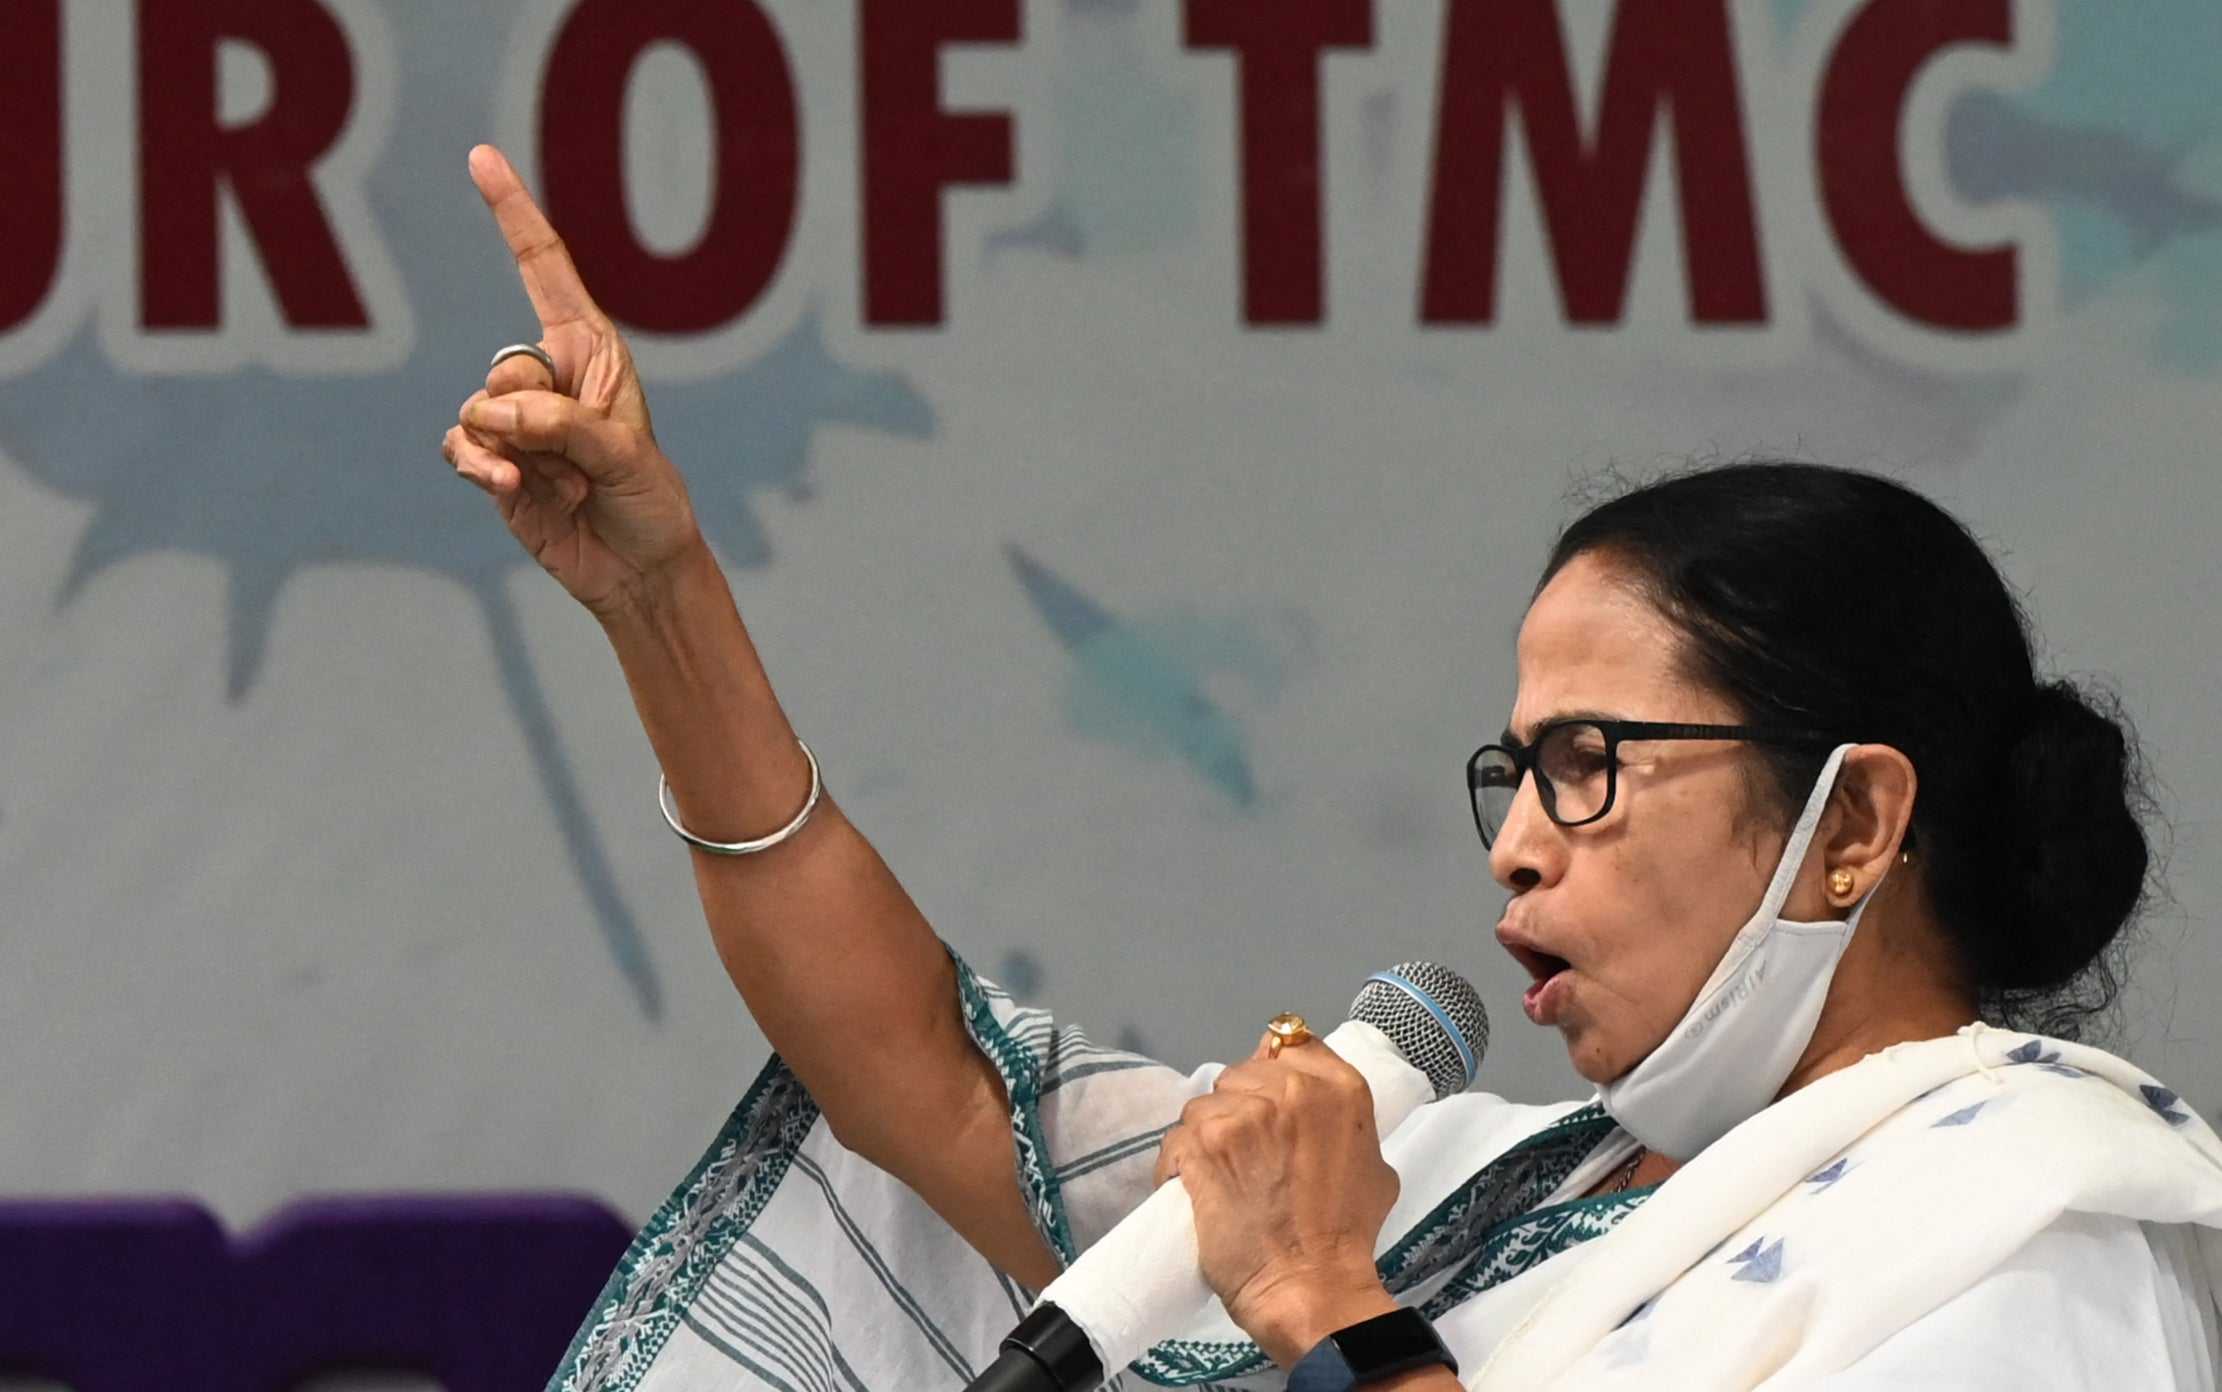 Mamata Banerjee, the chief minister of West Bengal, speaks during a public meeting in Kolkata